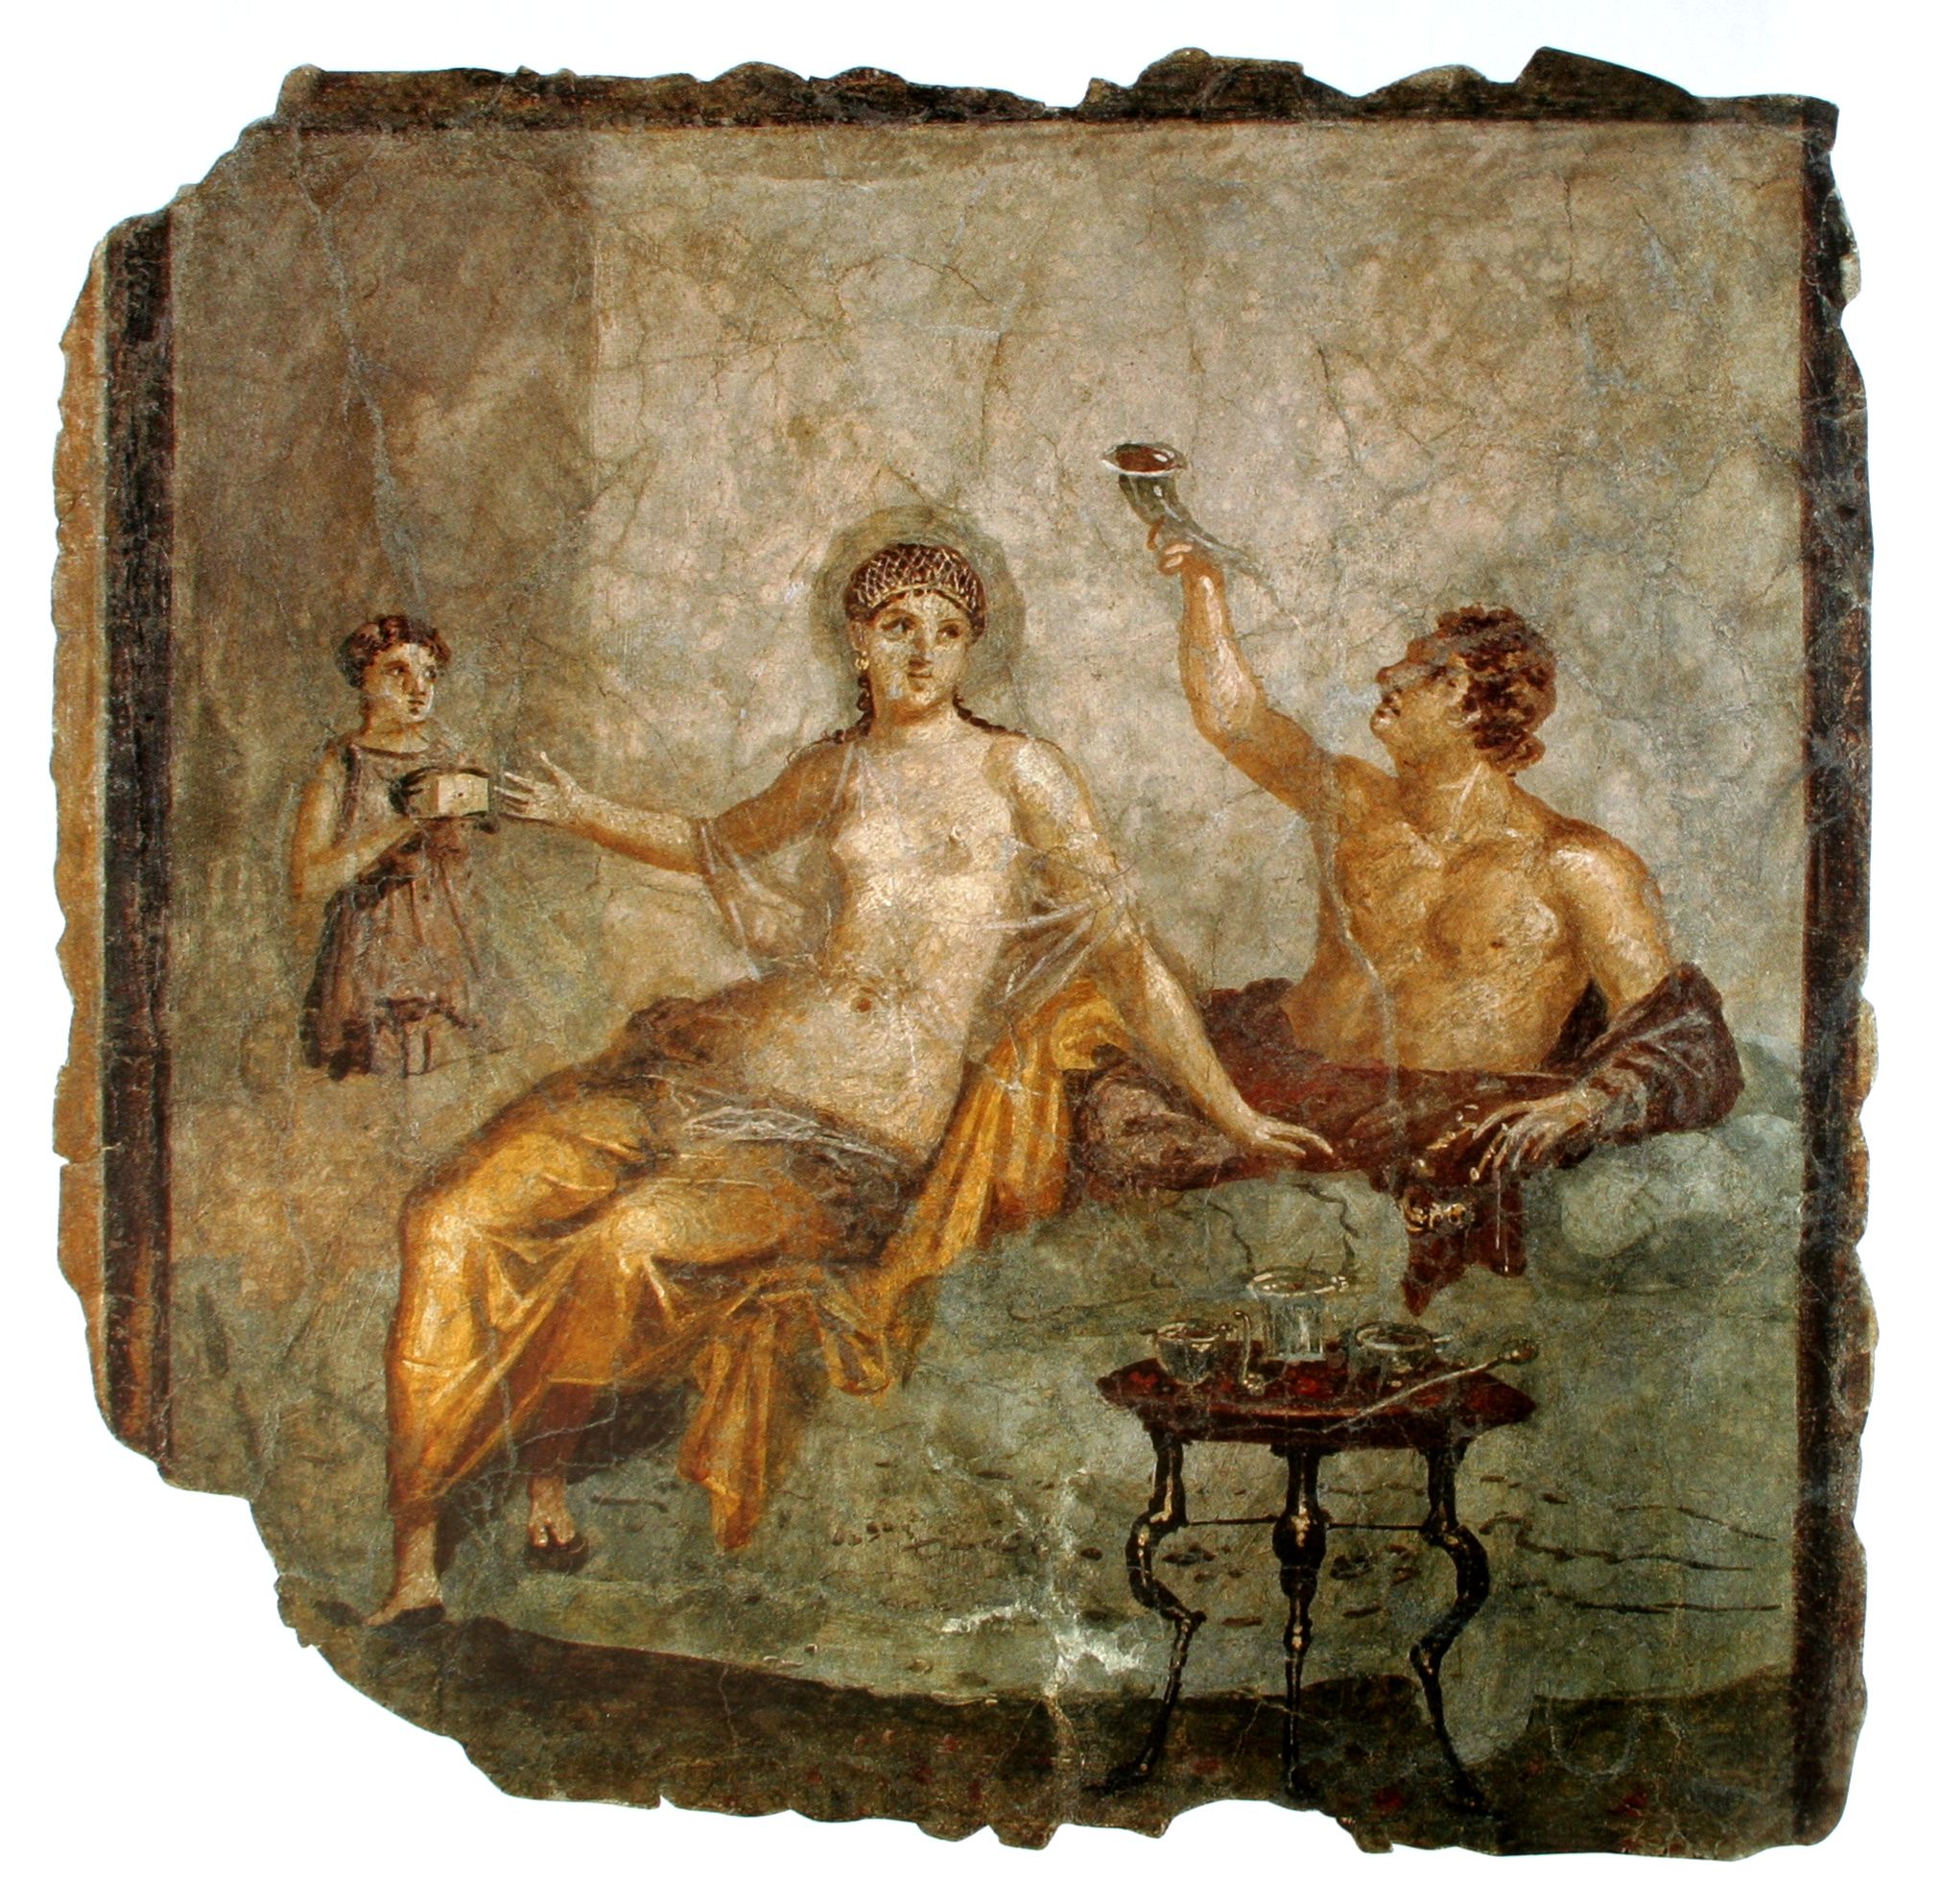 A late Roman-Republican banquet scene in a fresco from Herculaneum, Italy. 59 x 53 cm. The woman wears a transparent silk gown while the man to the left raises a rhyton drinking vessel.